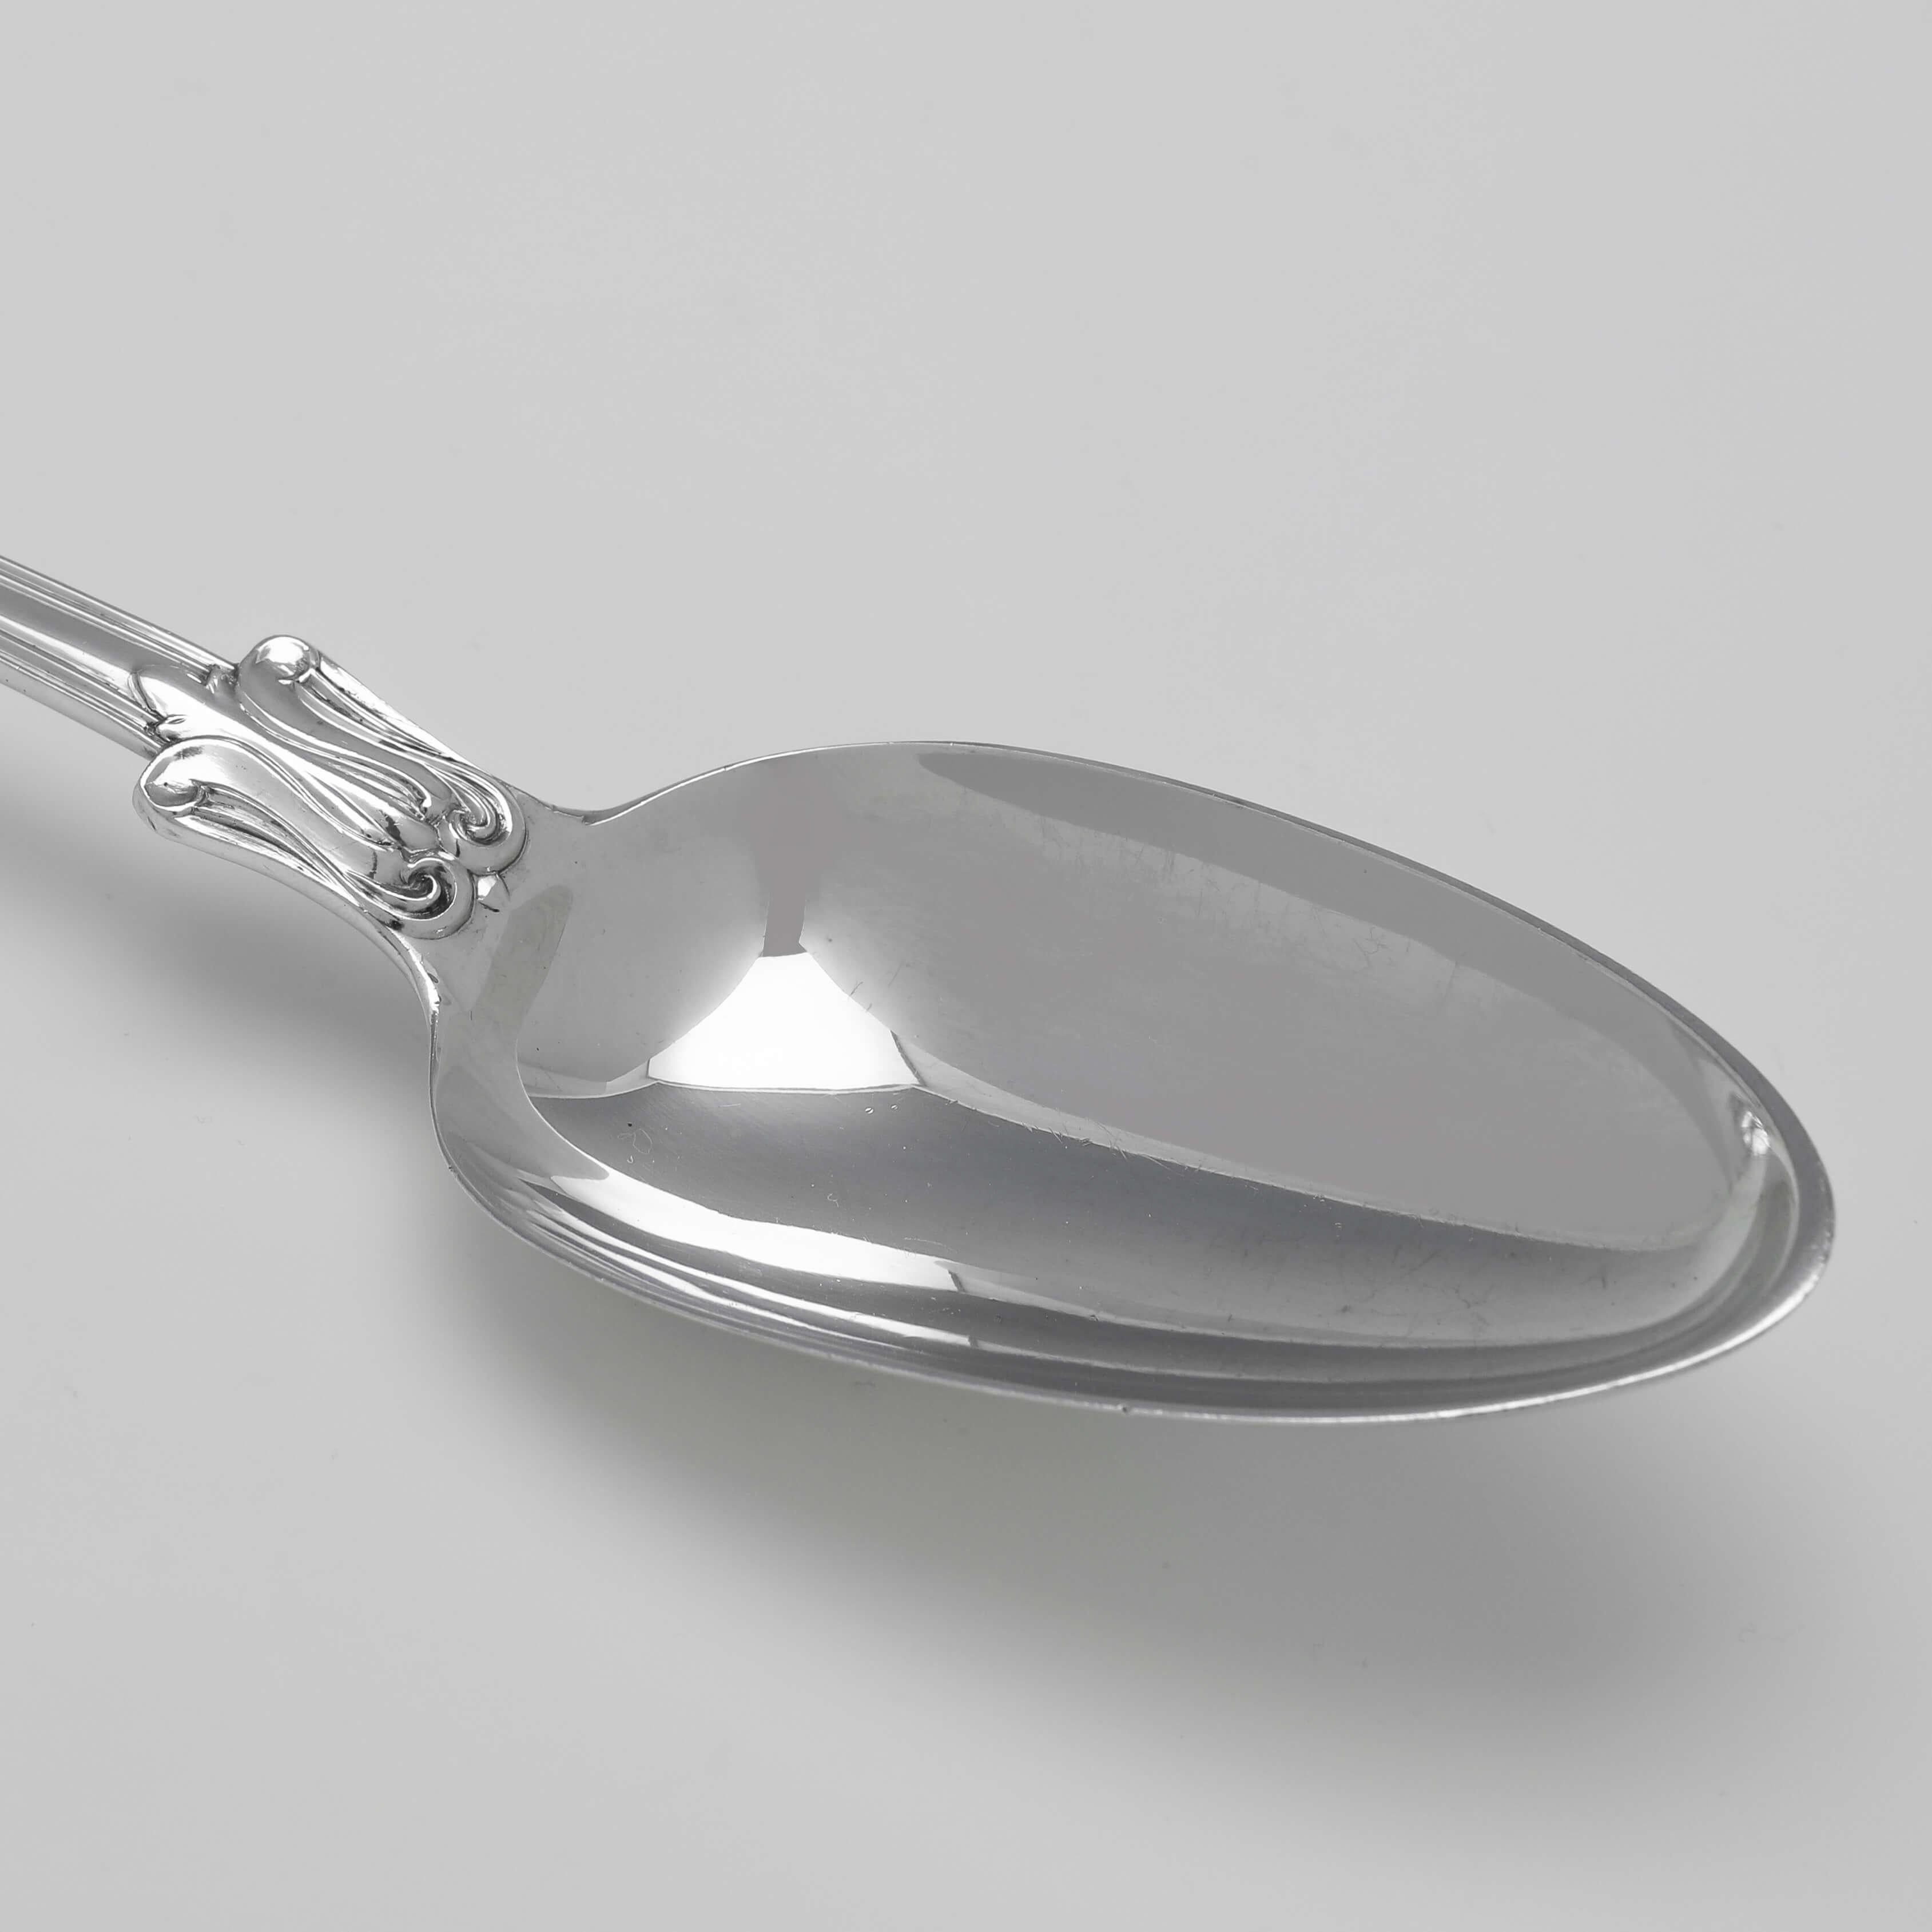 Victorian Sterling Silver 'Victoria' Pattern Basting Spoon - London 1855 For Sale